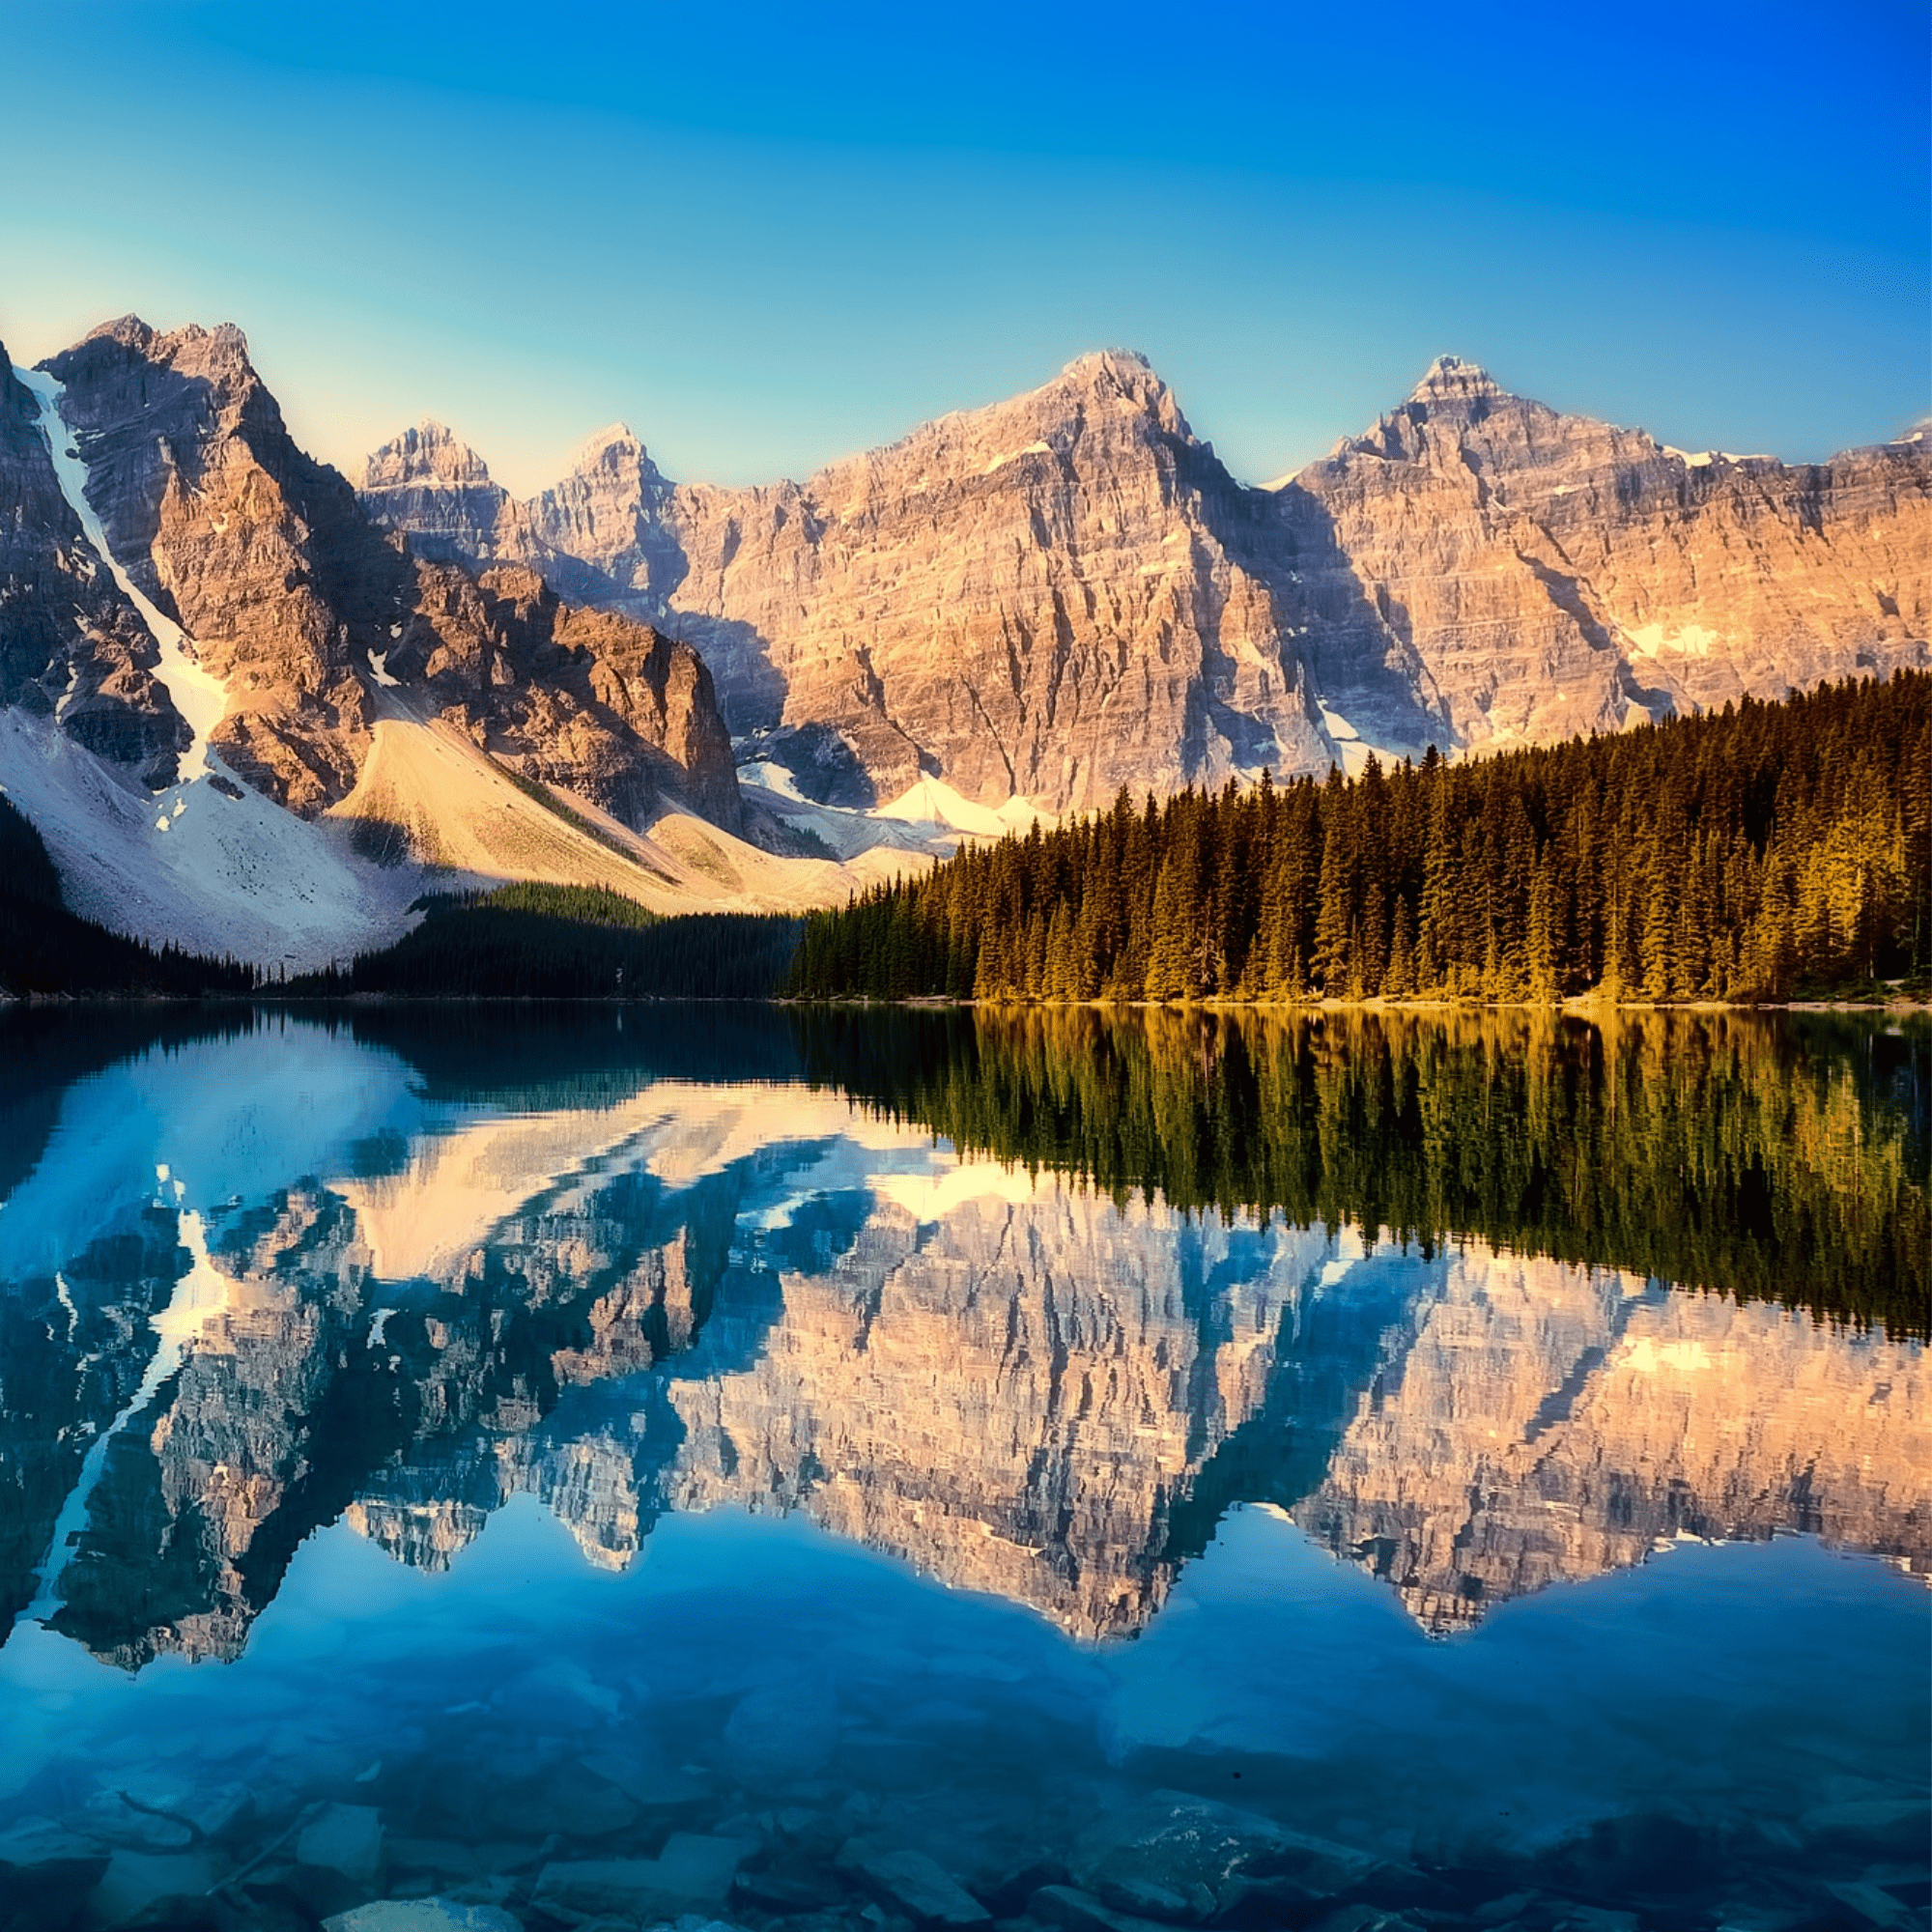 Crystal lake with mountains